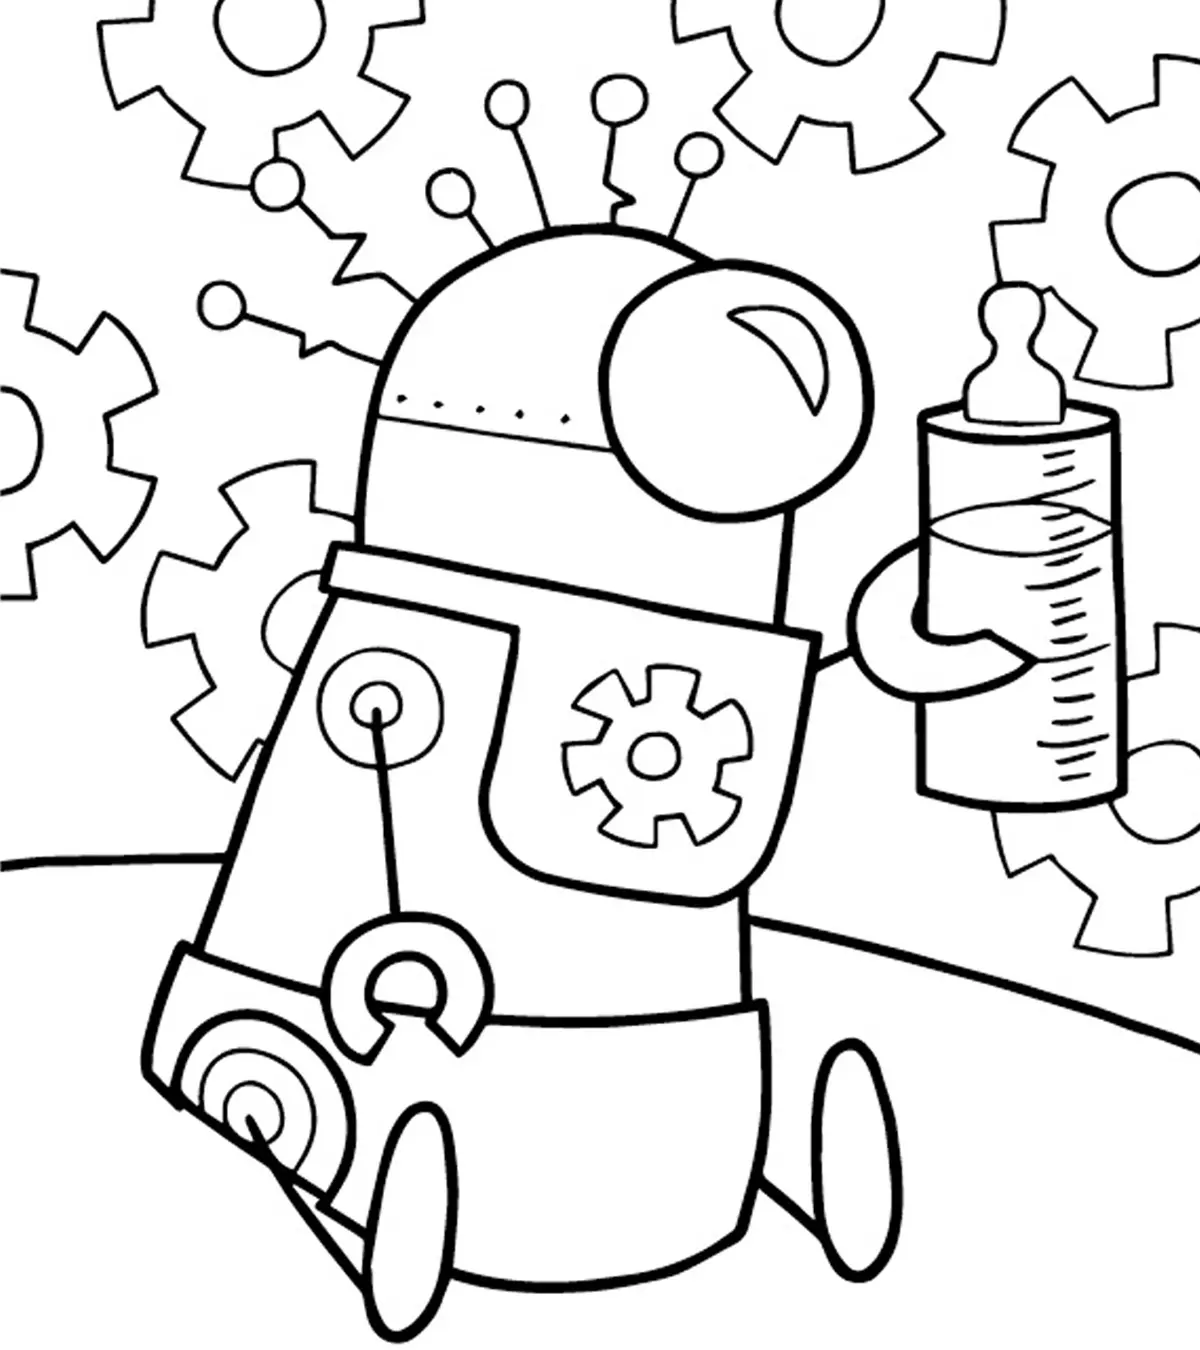 20 Cute Robot Coloring Pages For Your Little One